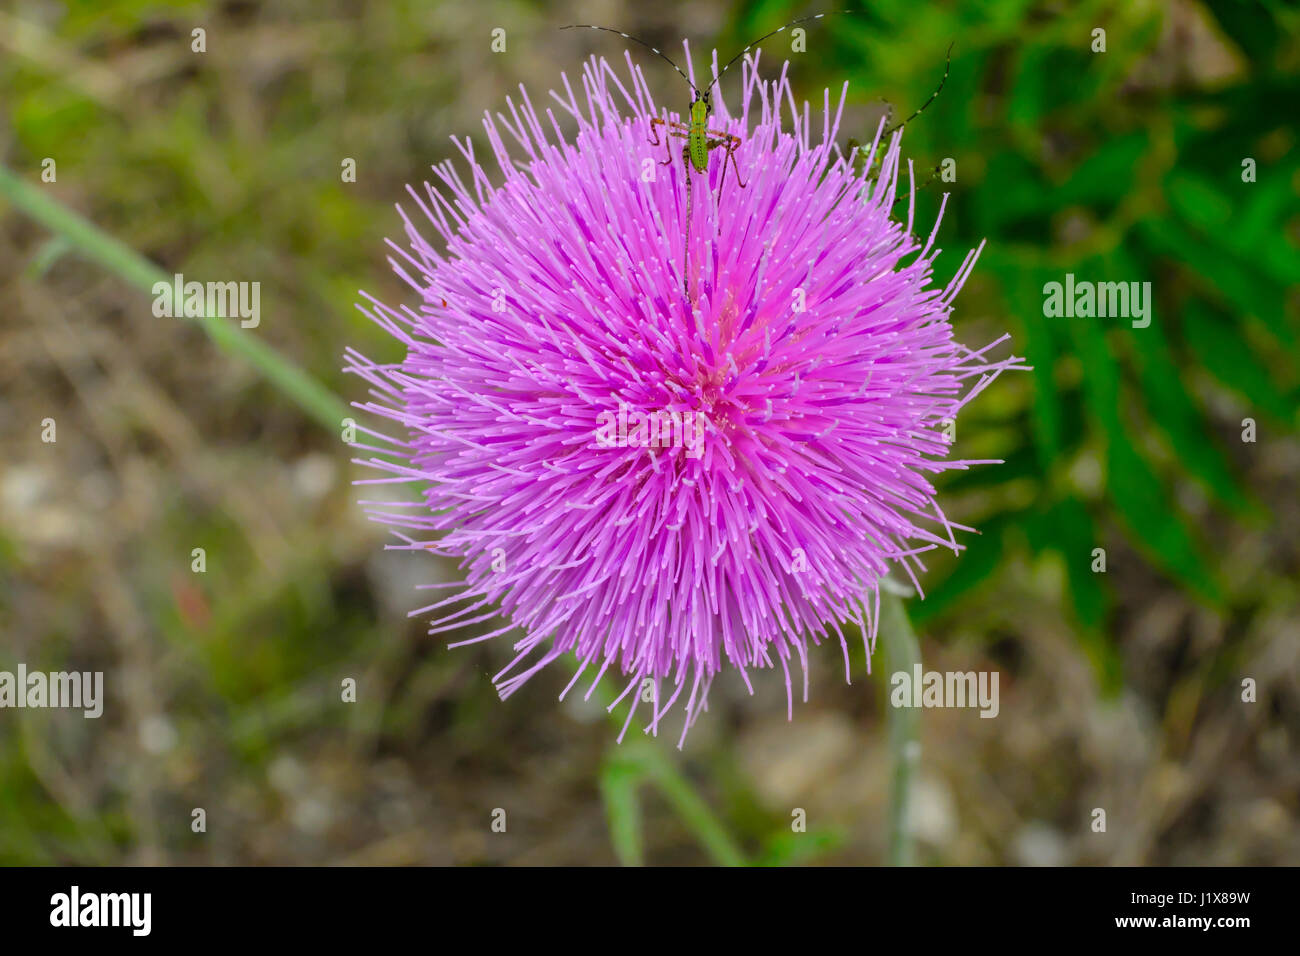 Closeup of the purple blossom of a musk or nodding thistle. Generally considered an invasive species in many regions. Stock Photo